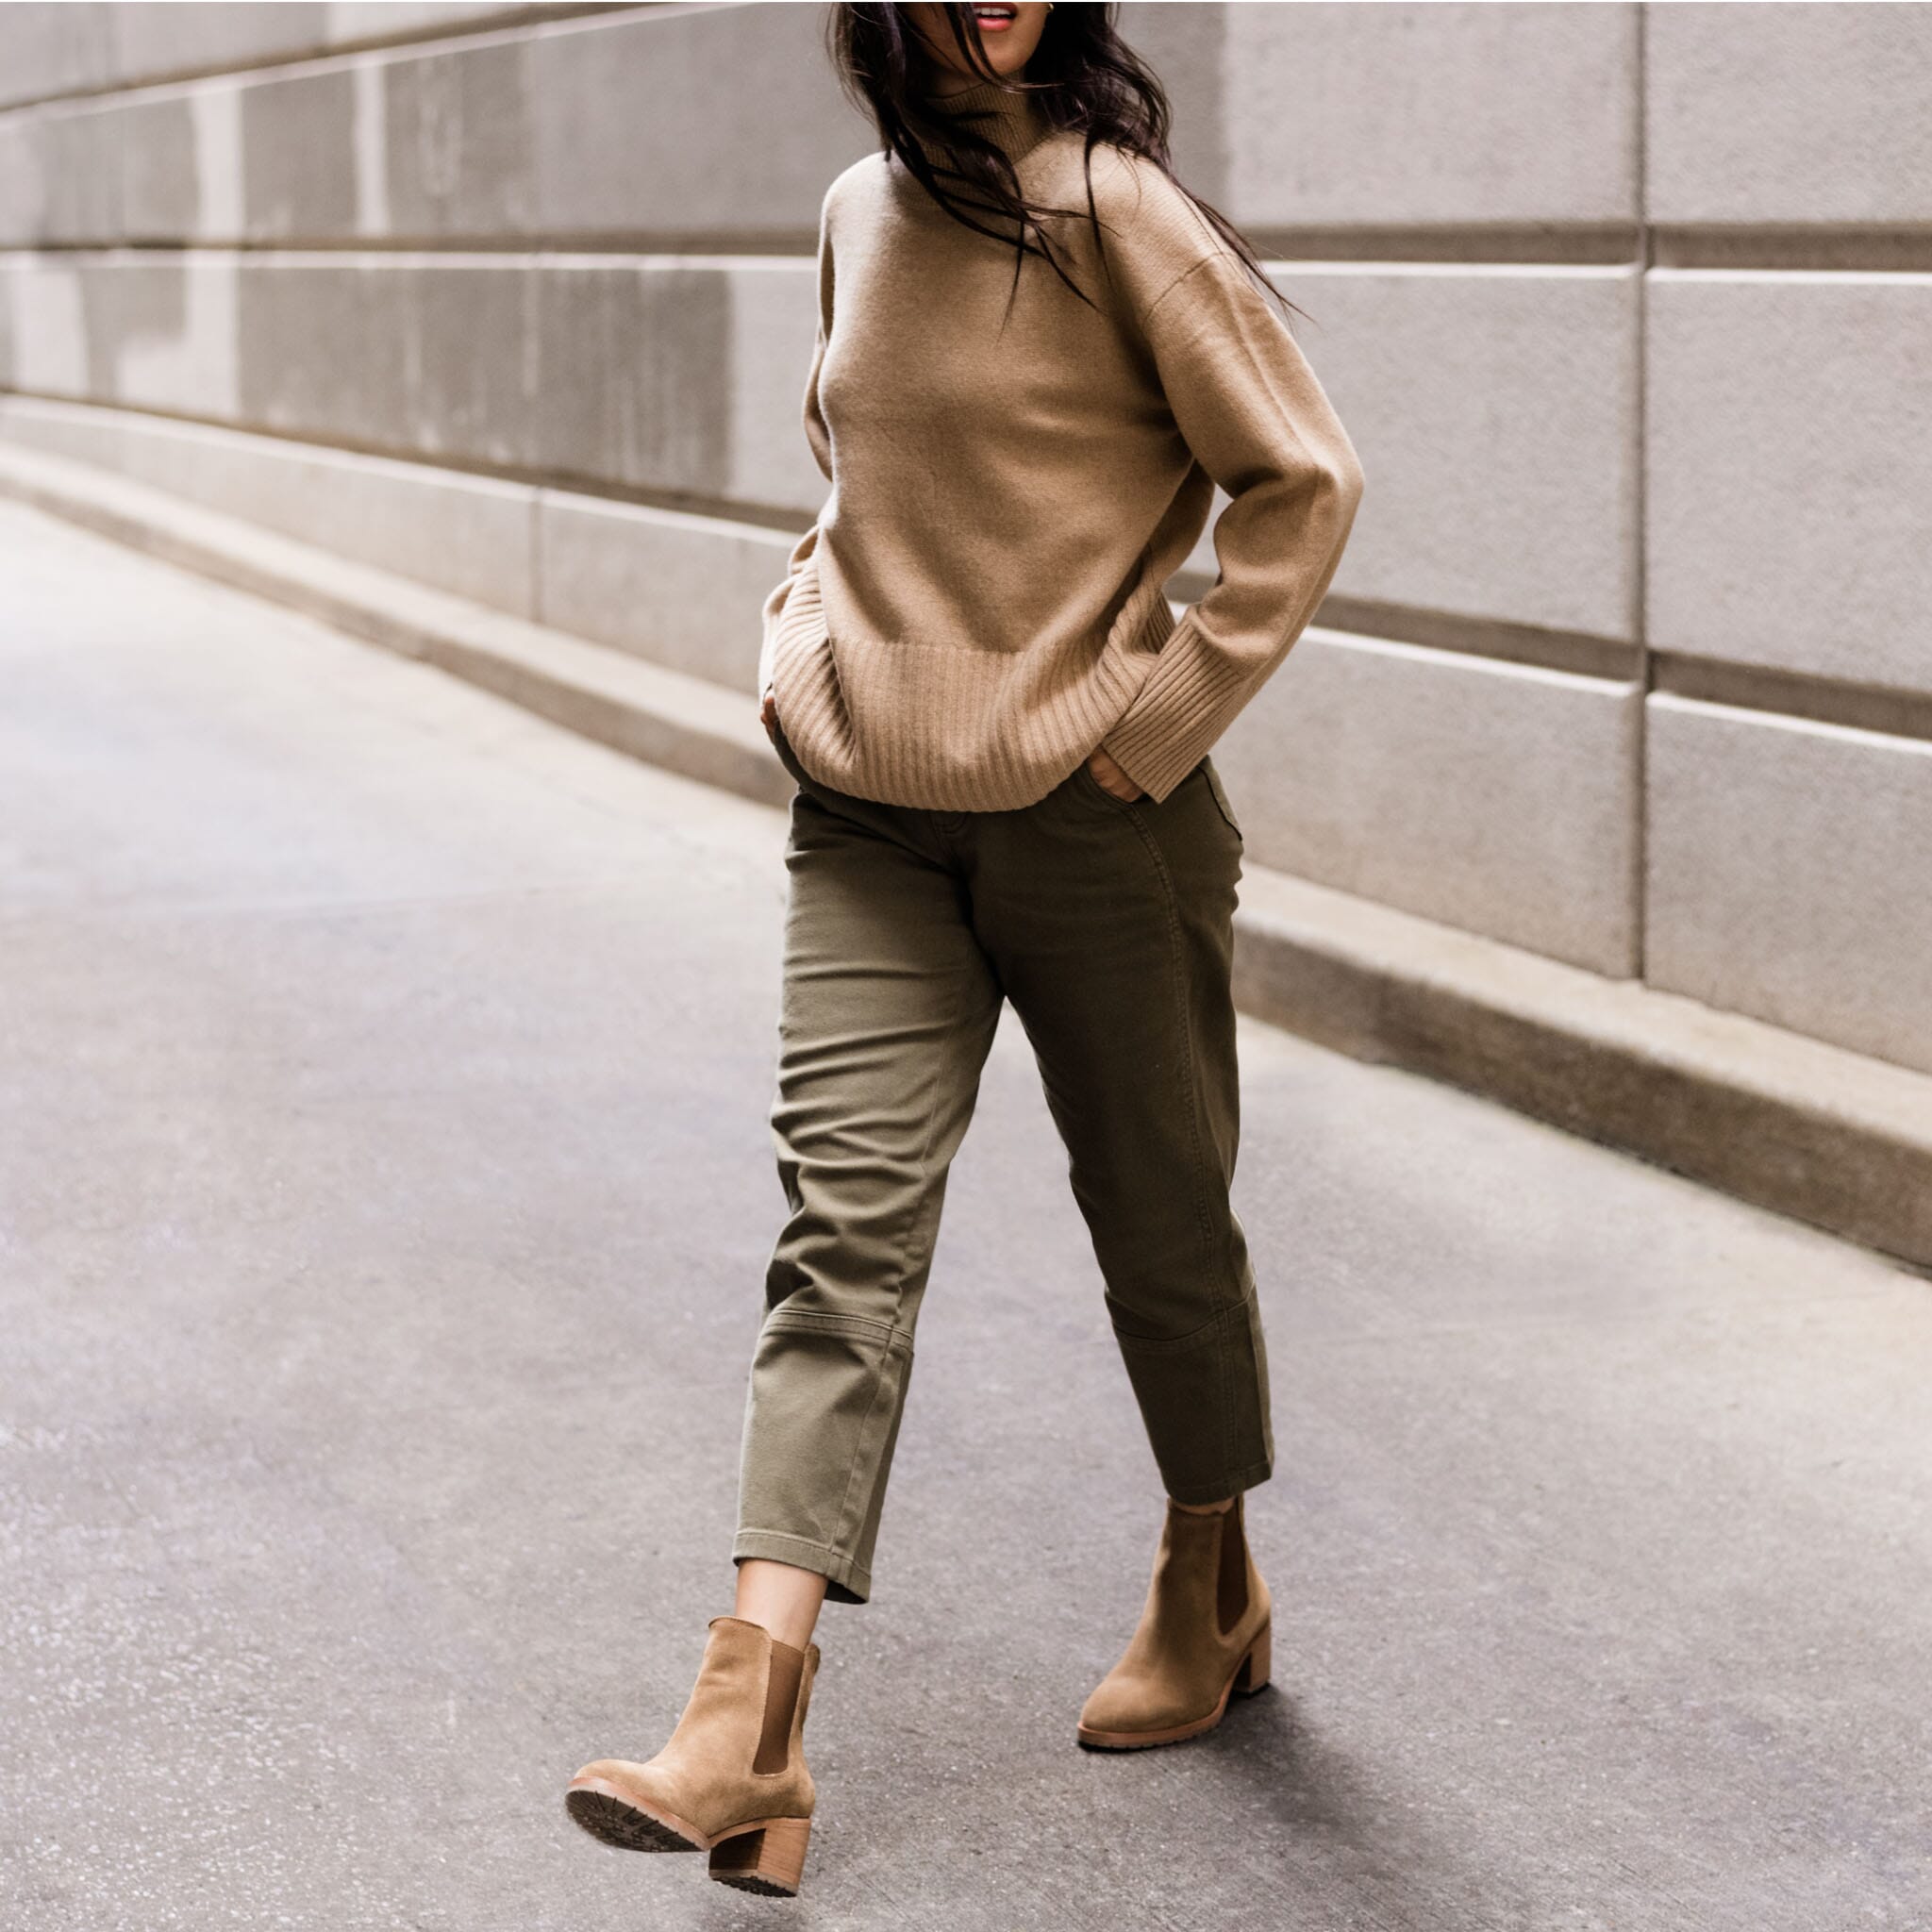 How To Style Chelsea Boots: 10+ Outfit Ideas